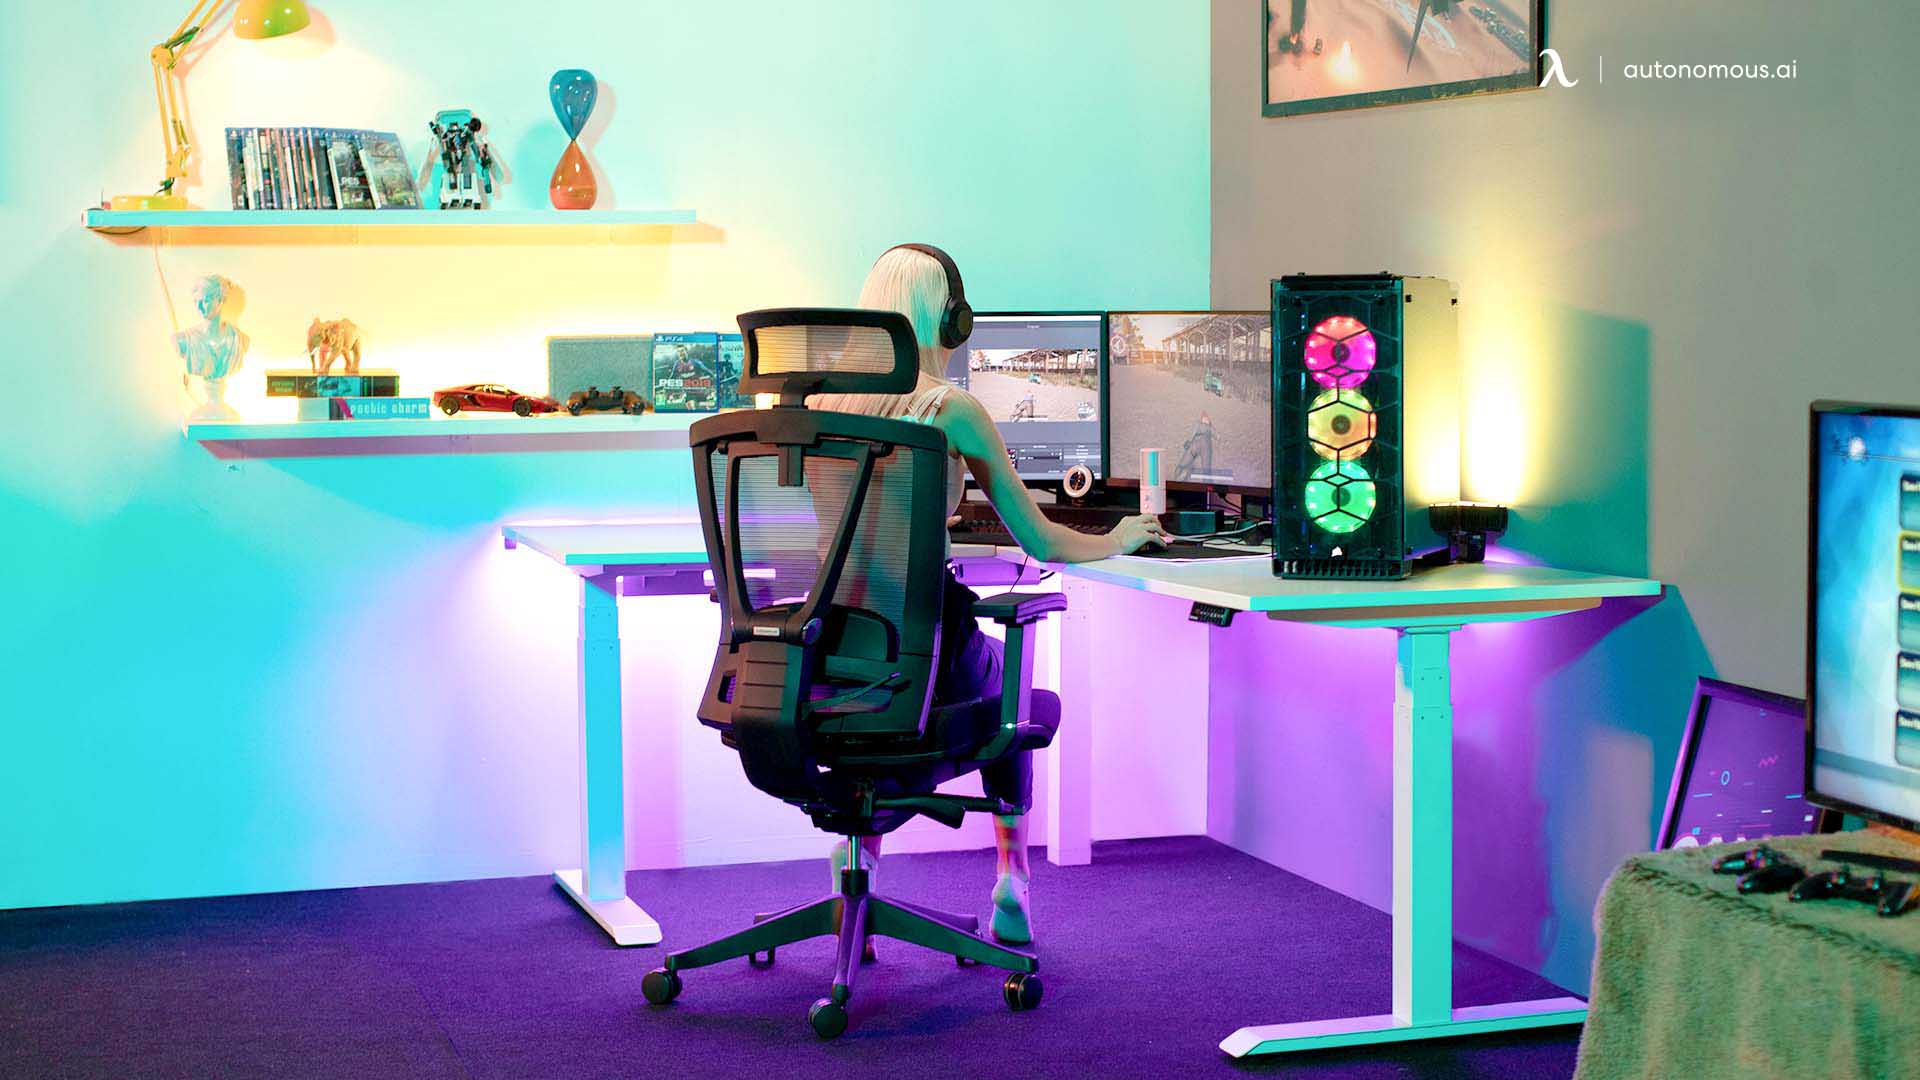 The 6 Best Comfortable Office Chair for Gaming in 2022